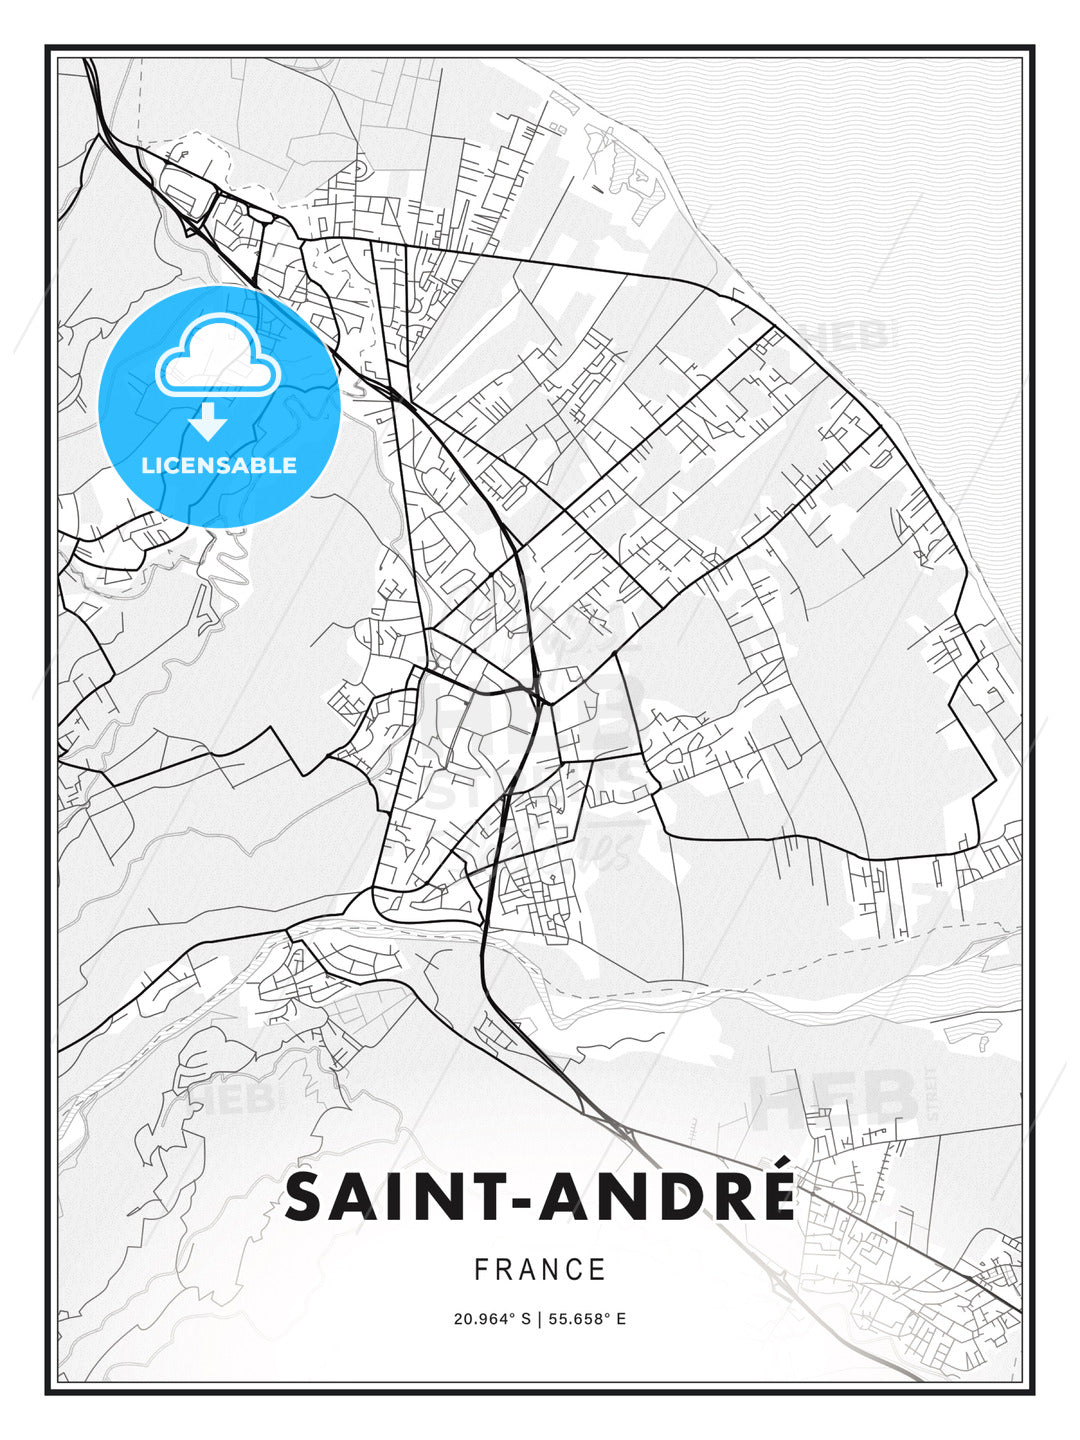 Saint-André, France, Modern Print Template in Various Formats - HEBSTREITS Sketches